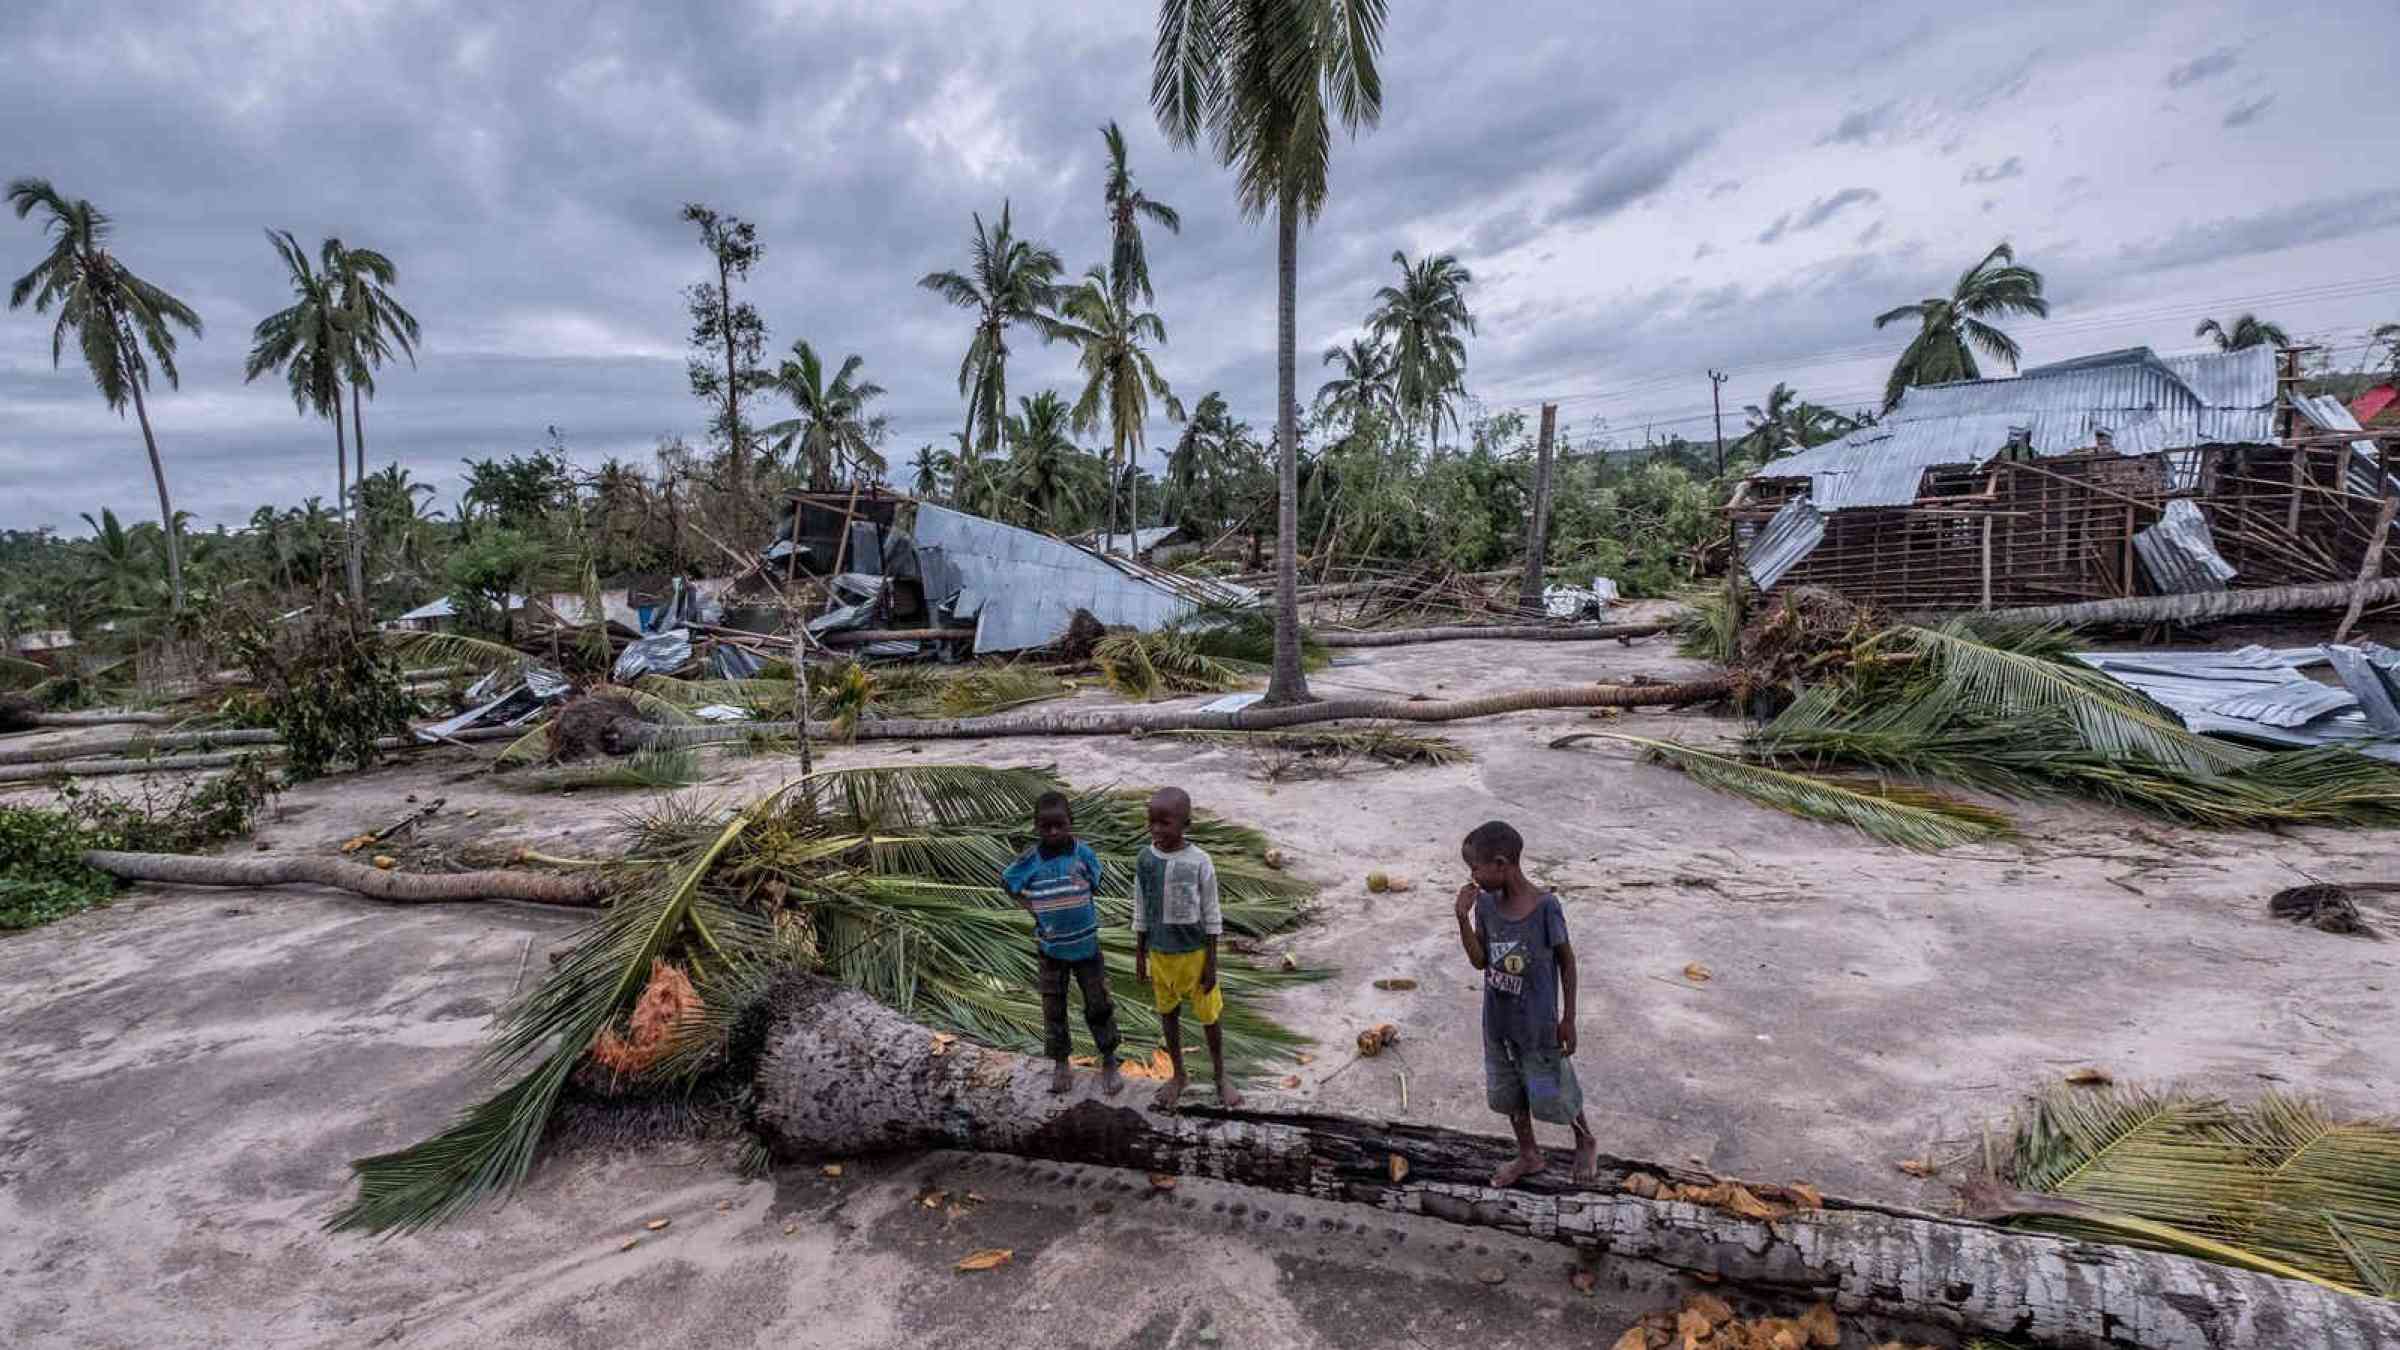 Scene of destruction after the second passage of Cyclone Freddy in Zambézia province, Mozambique